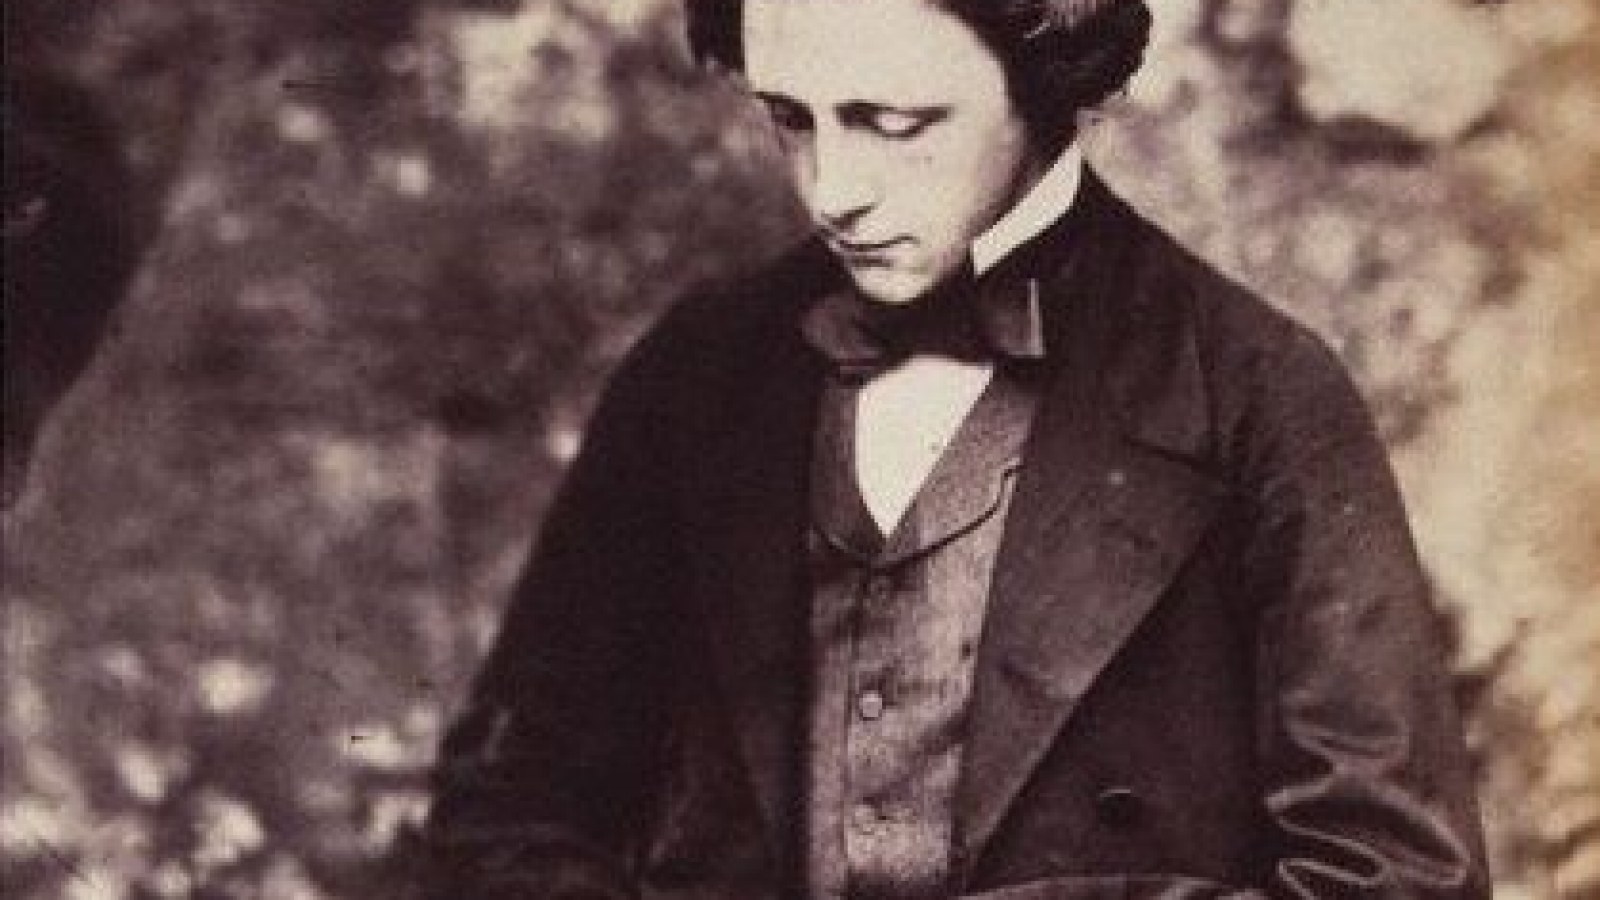 Lewis Carroll - Biography and Works